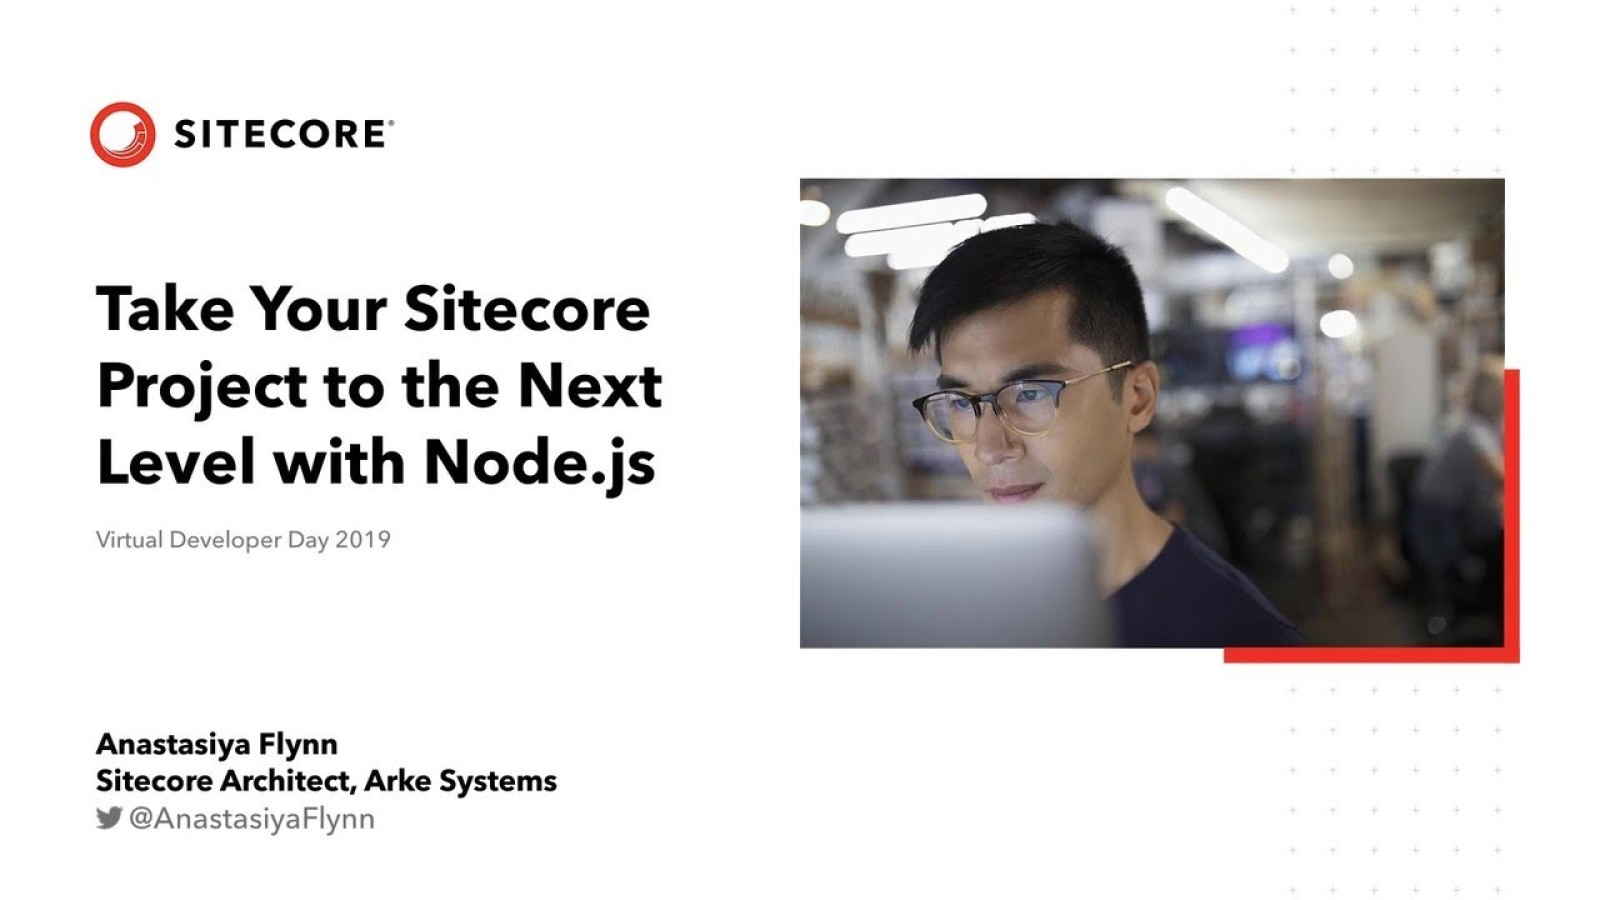 Take Your Sitecore Project To The Next LevelWith Node.js